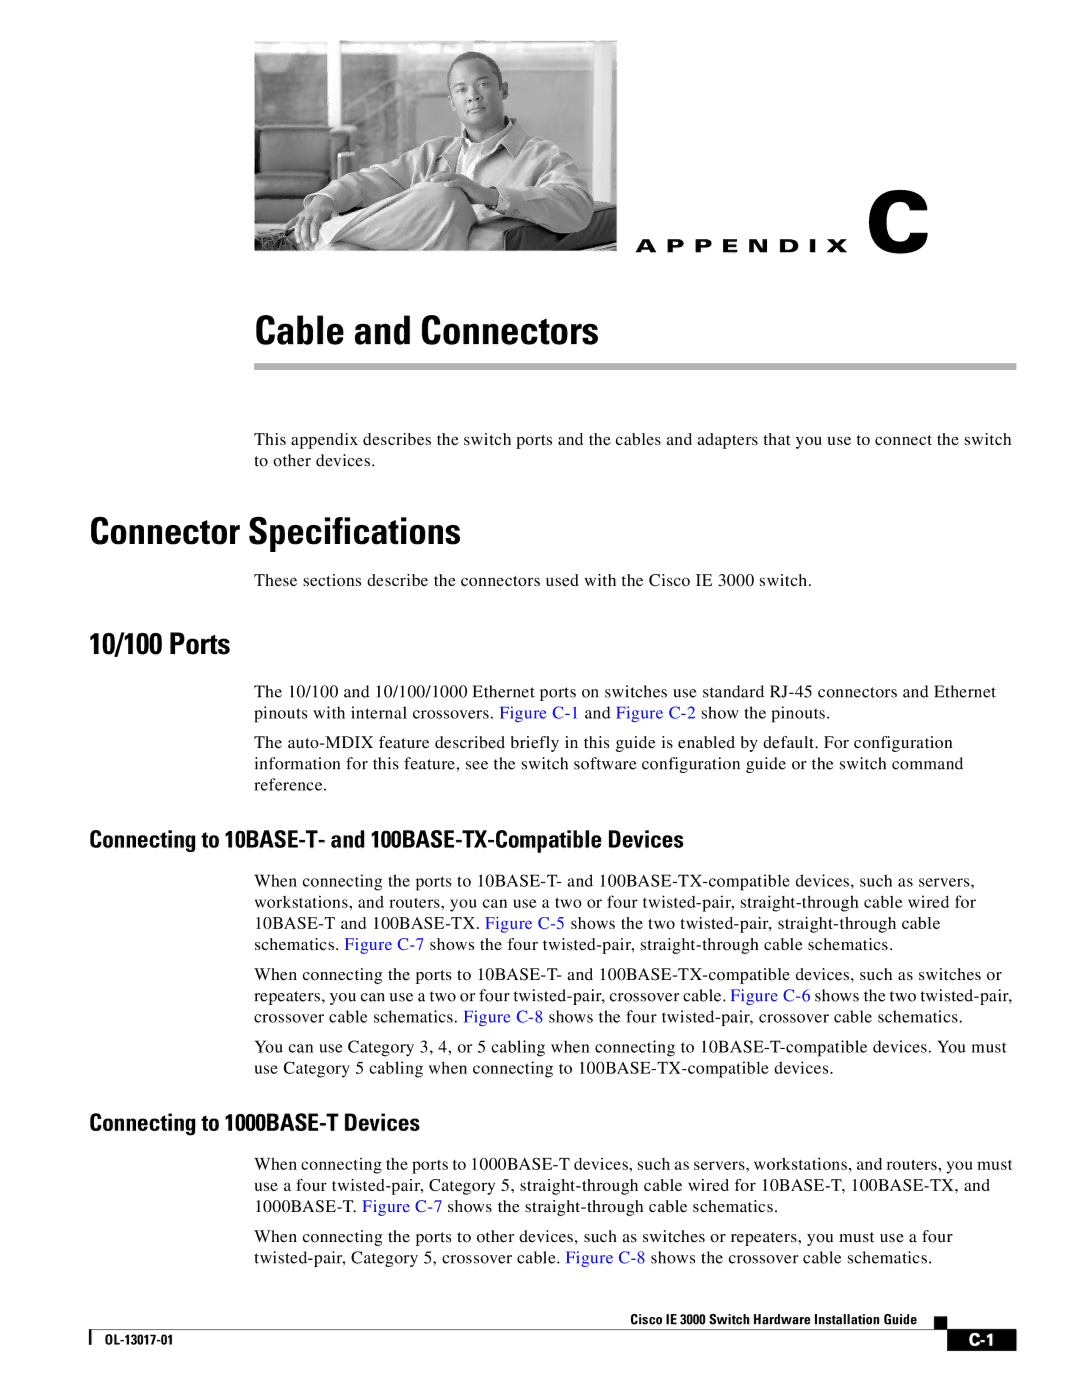 Cisco Systems IE 3000 Series manual Connector Specifications, Connecting to 10BASE-T- and 100BASE-TX-Compatible Devices 